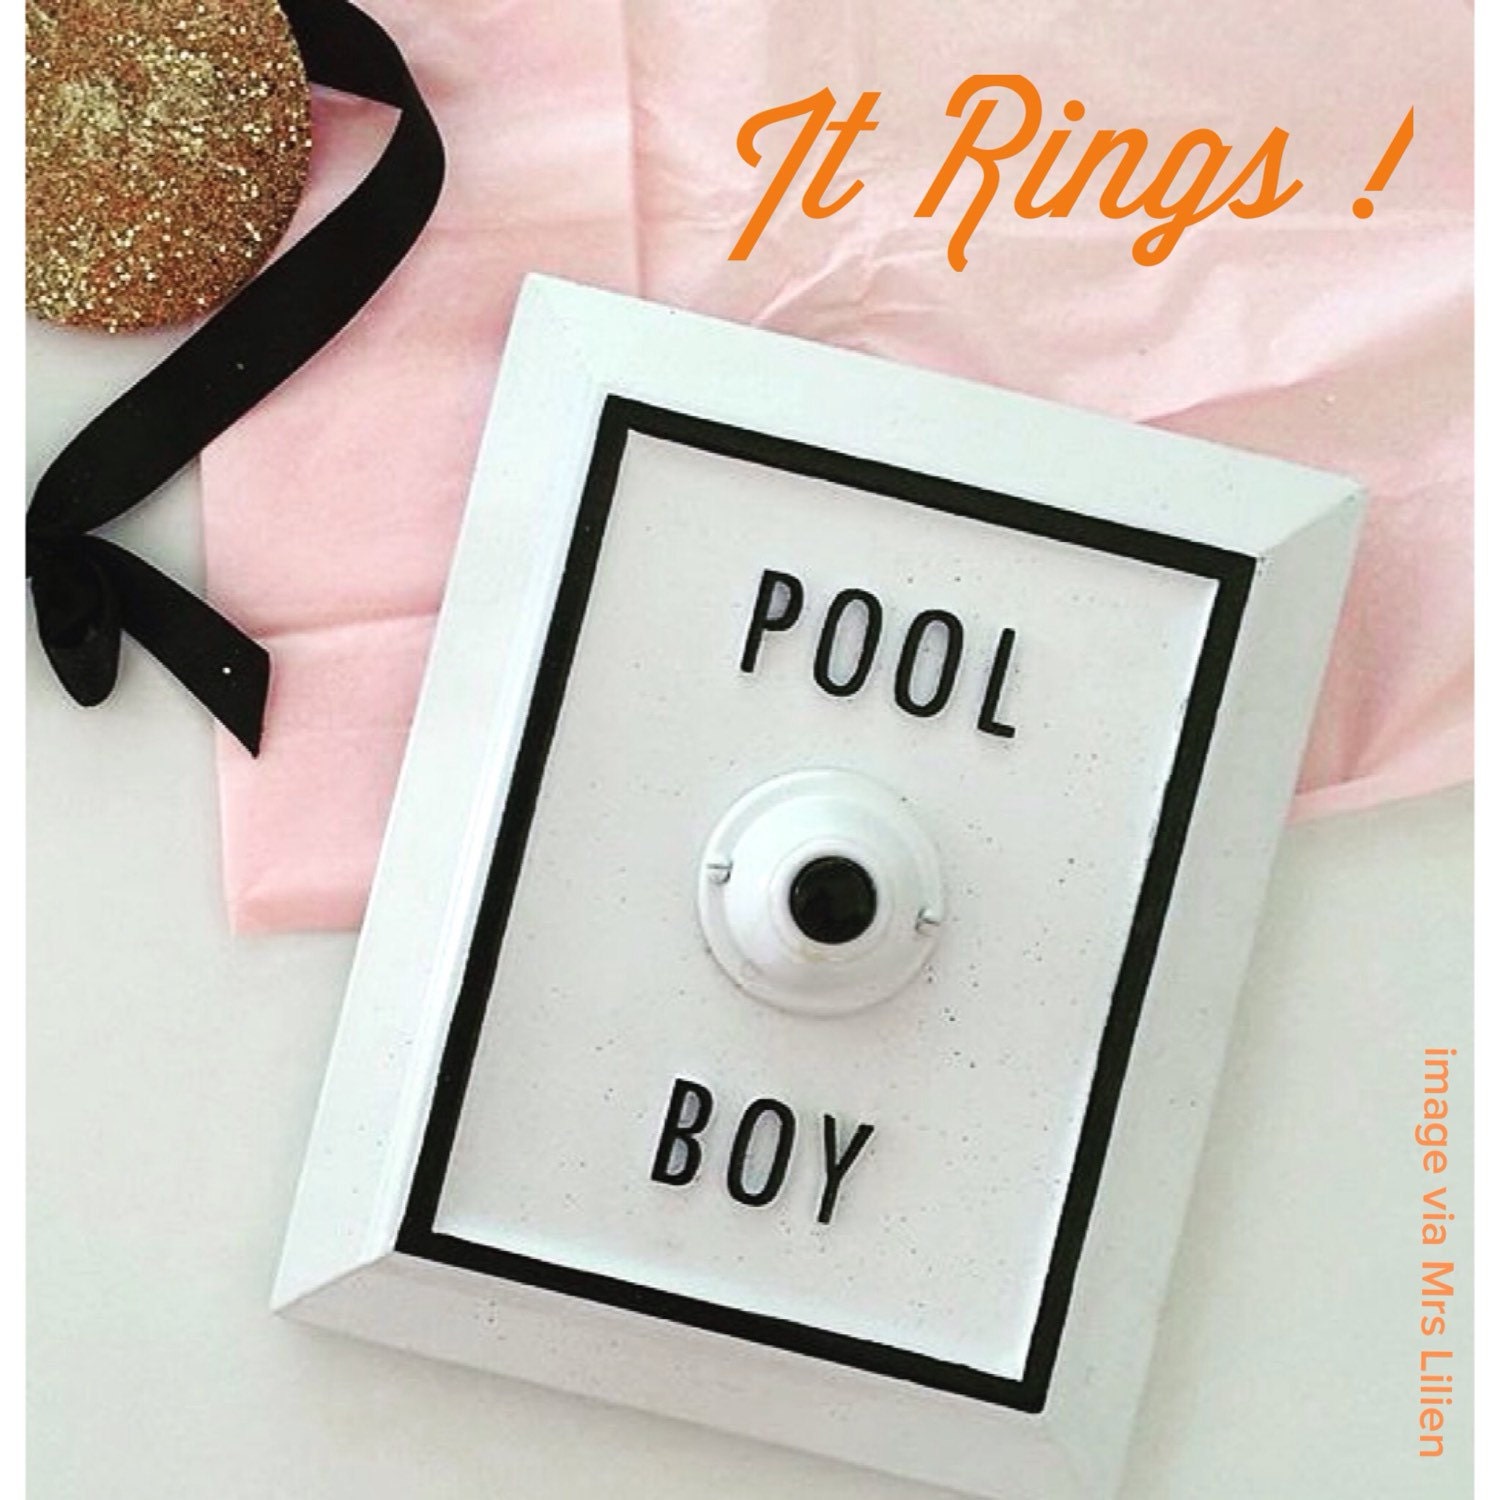 Pool Boy concrete sign with button ( ringing version )